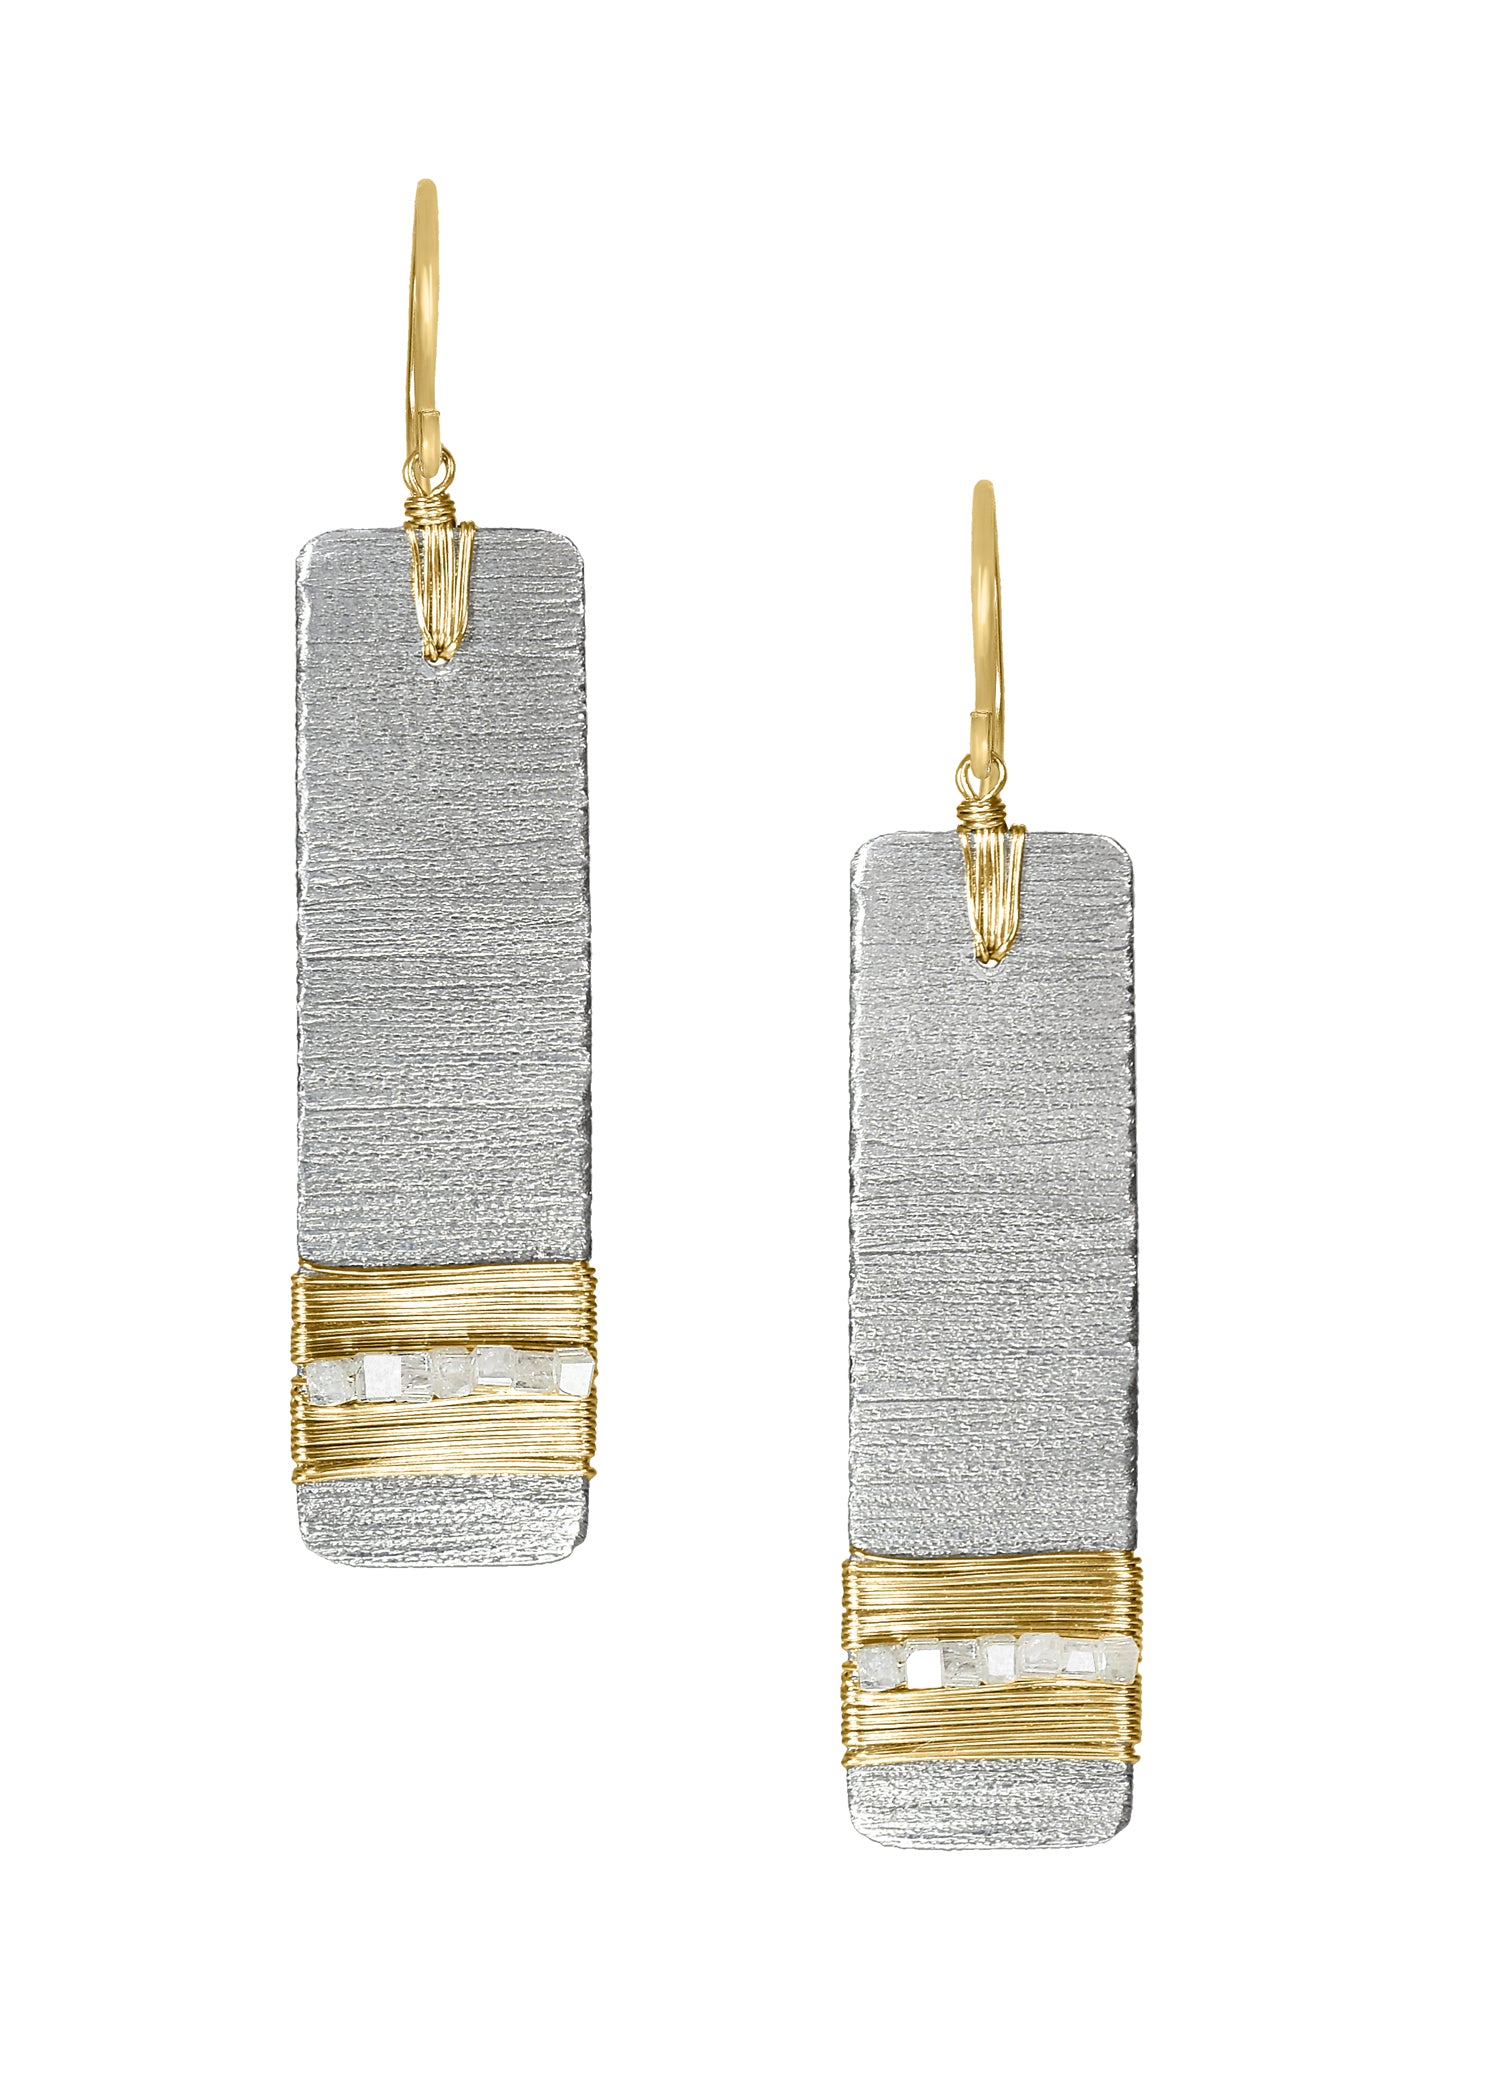 Diamond 14k gold Sterling silver Mixed metal Earrings measure 2" in length (including the ear wires) and 7/16" in width Handmade in our Los Angeles studio